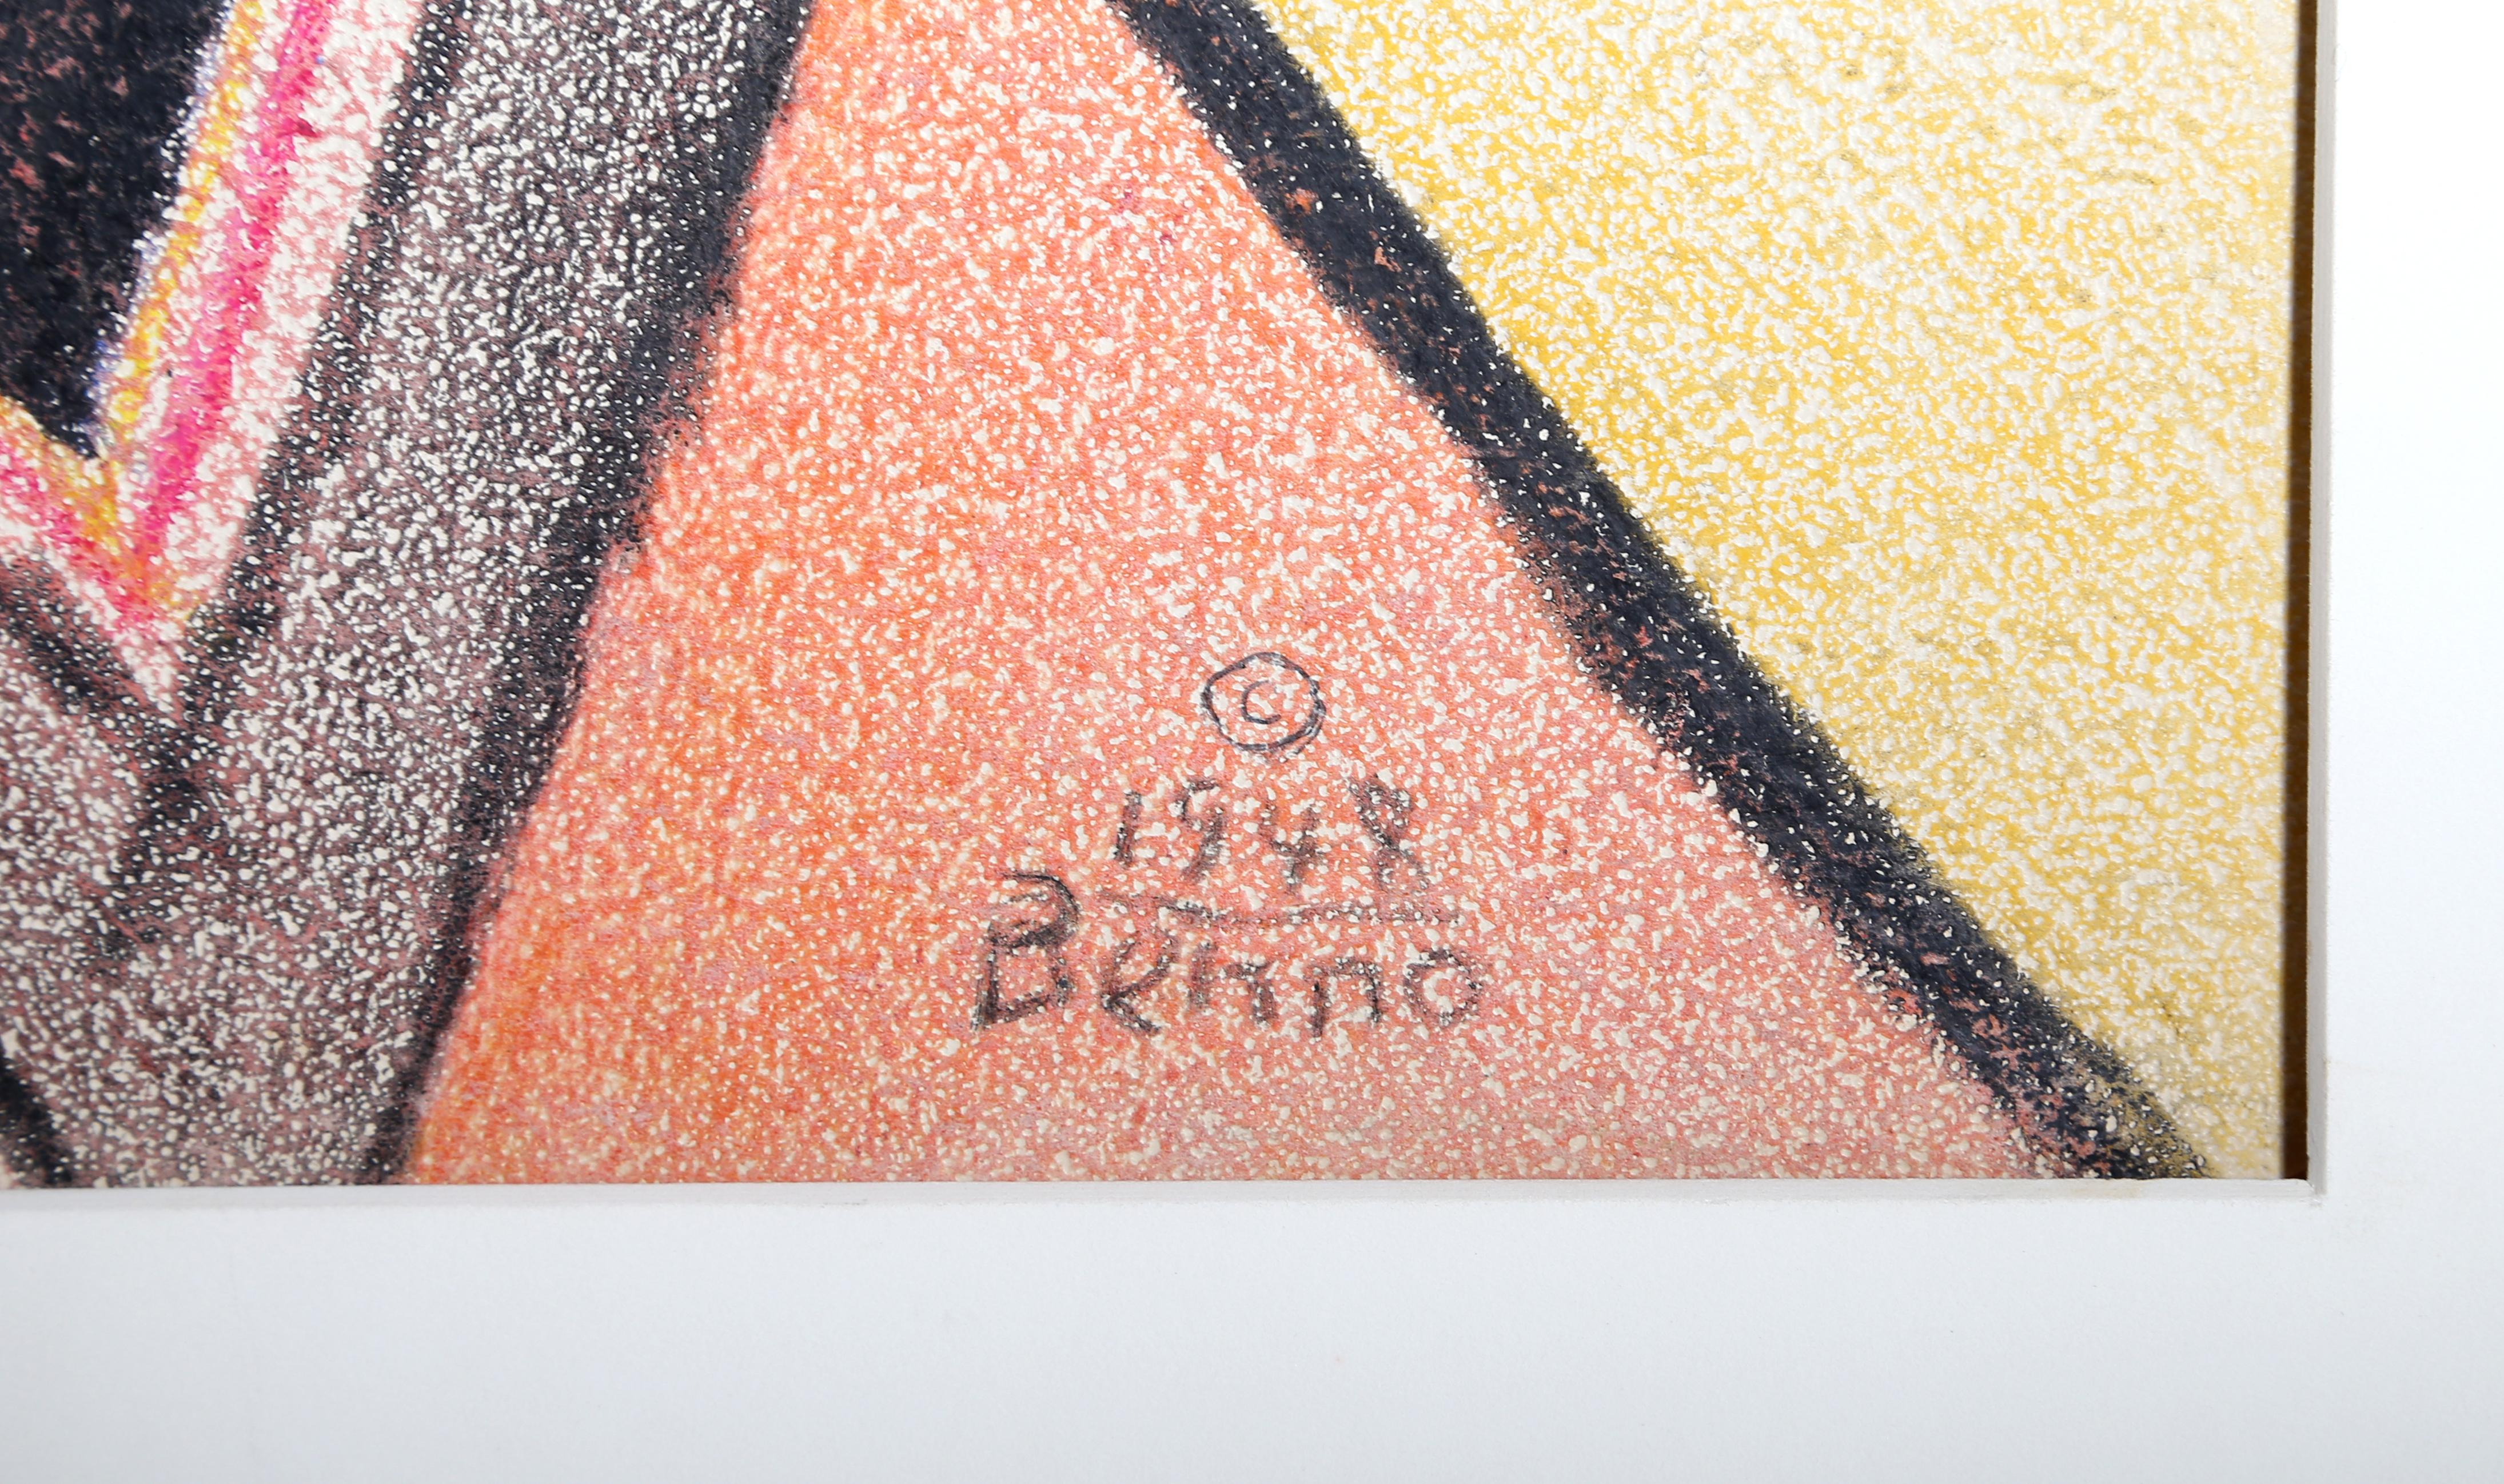 An original crayon on paper drawing by Benjamin Benno, American (1901 - 1980) measuring 30 x 17 inches. By the early 1930s he had established a reputation as a member of the international avant-garde and exhibited with the most significant European